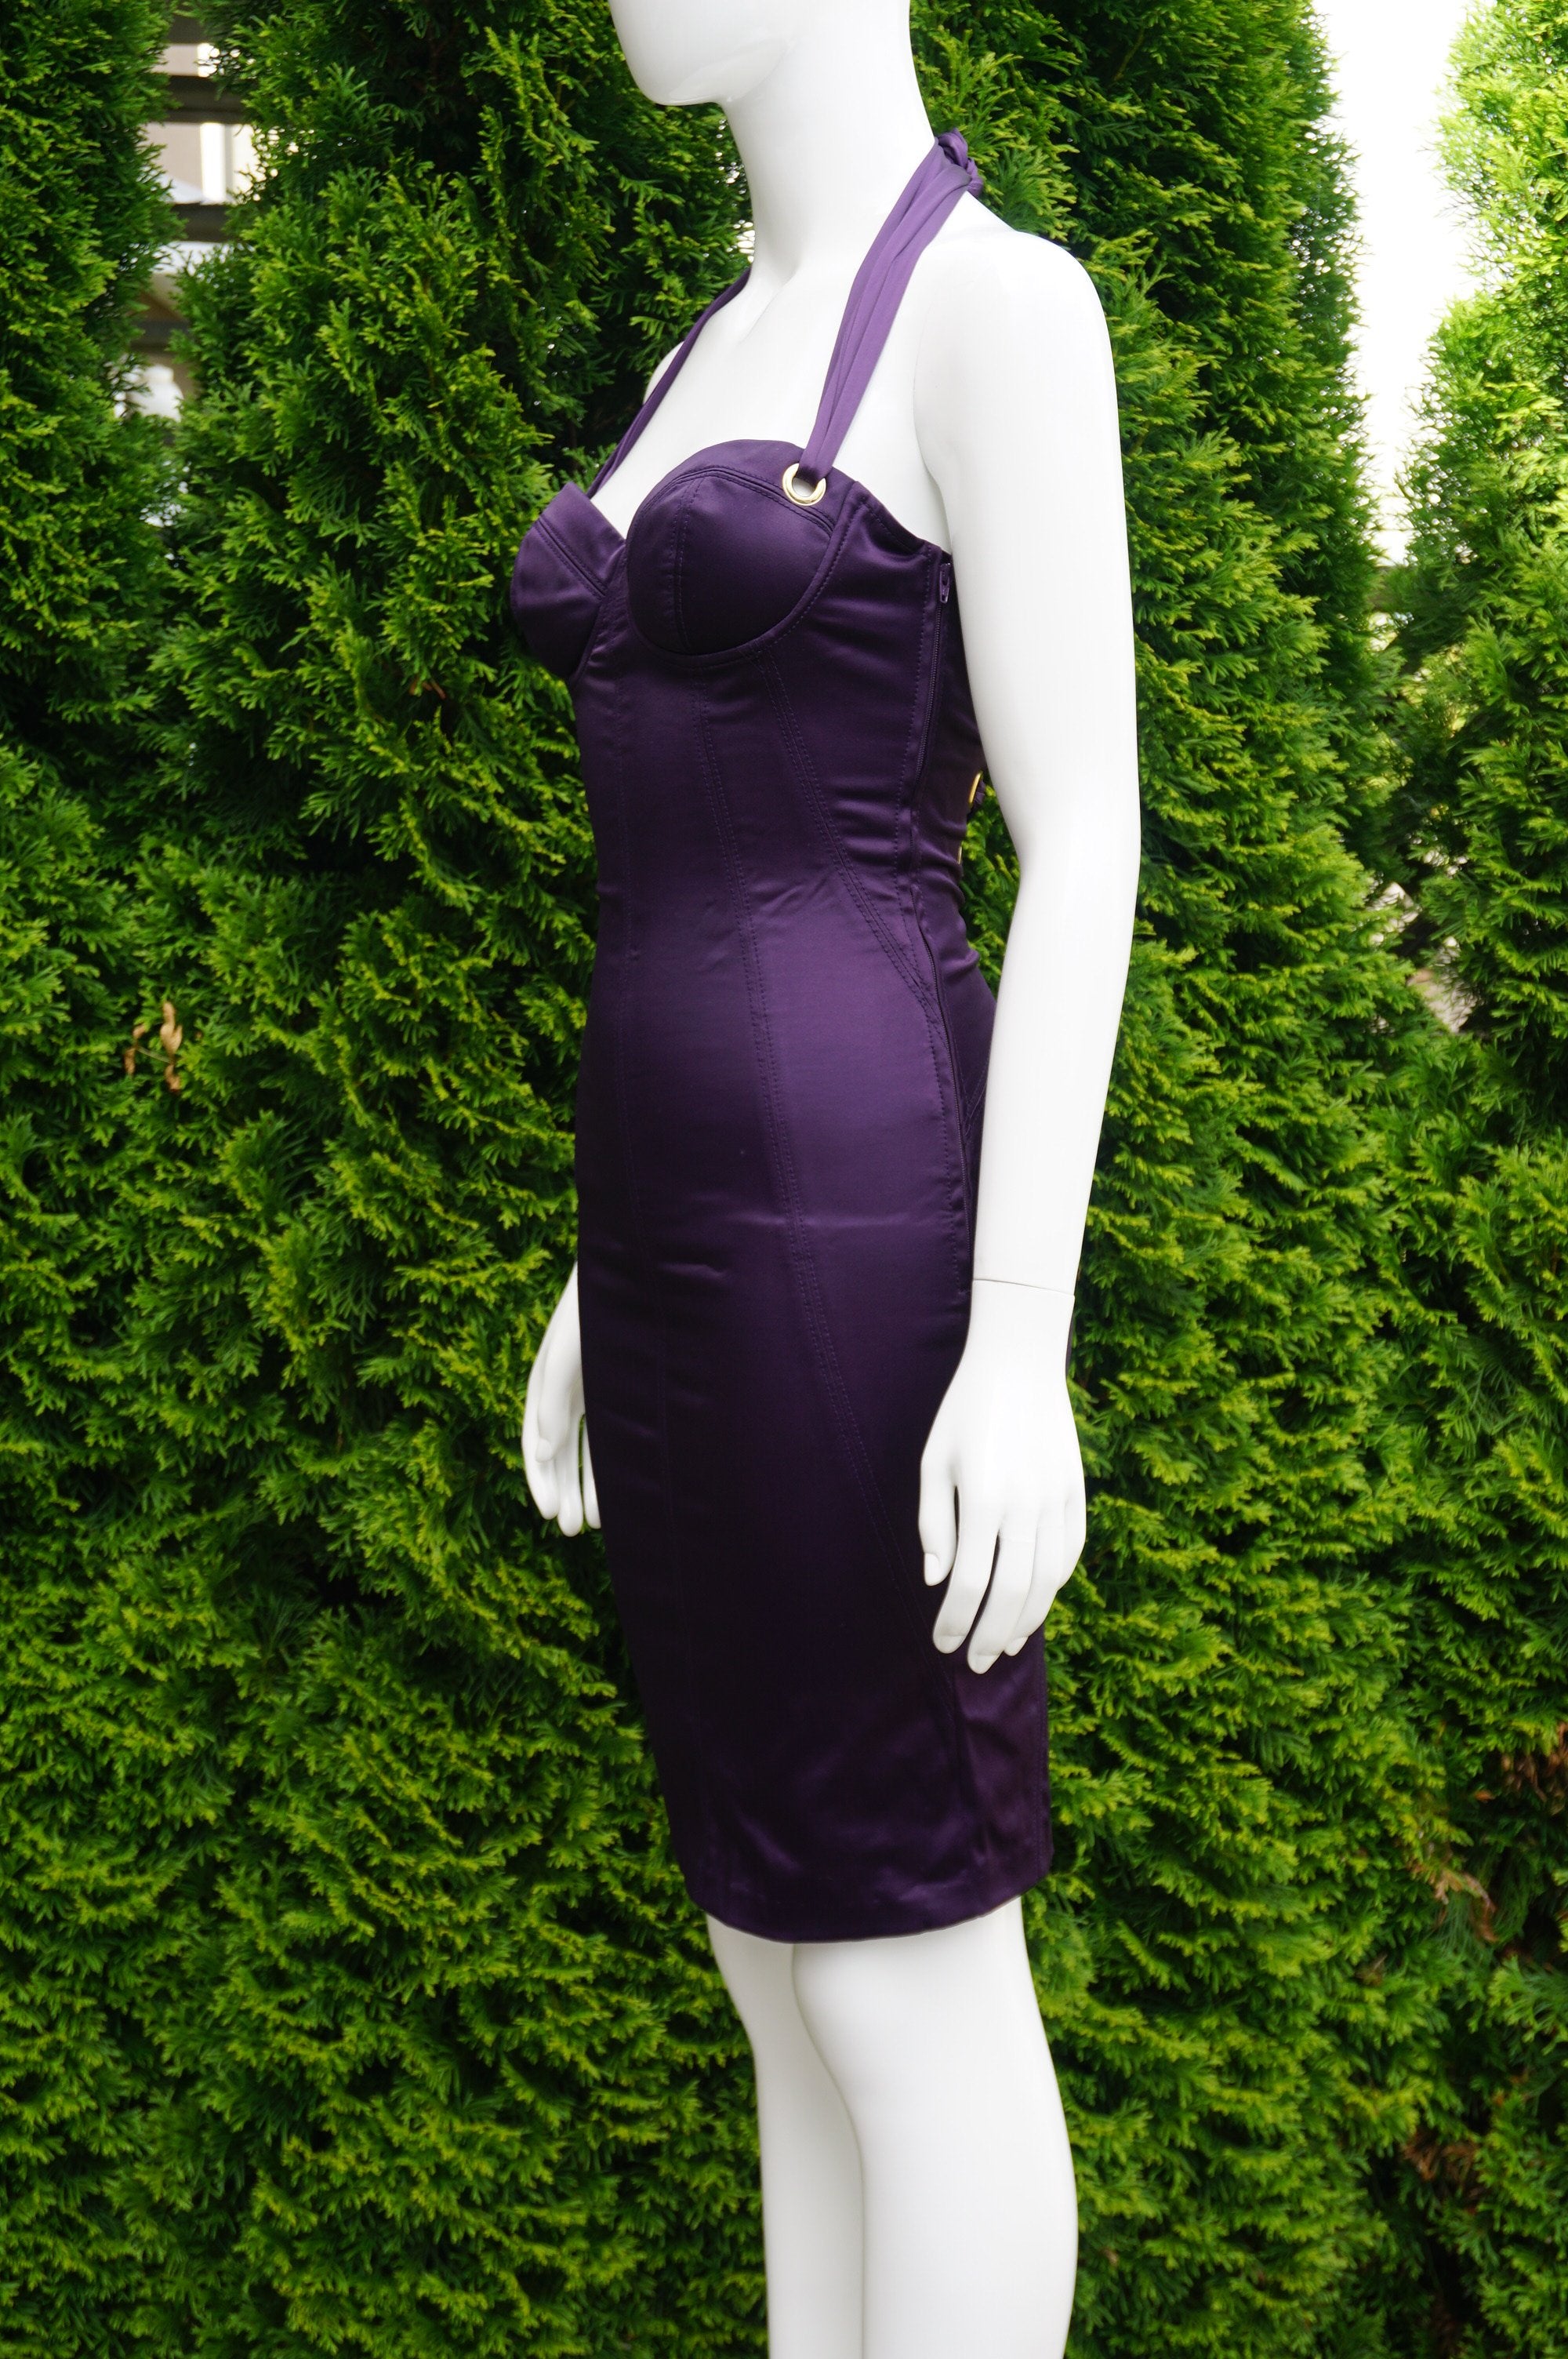 Marciano Purple Sleeveless Mini Dress with Adjustable Straps, Breast 28 inches, waist 24 inches (adjsutable straps leaving some room for size differnces, length 31 inches measured from top of breast., Purple, 53% Polyester, 44% cotton, 3% Spandes, women's Dresses & Rompers, women's Purple Dresses & Rompers, Marciano women's Dresses & Rompers, mini dress, purple dress, bodycon dress,